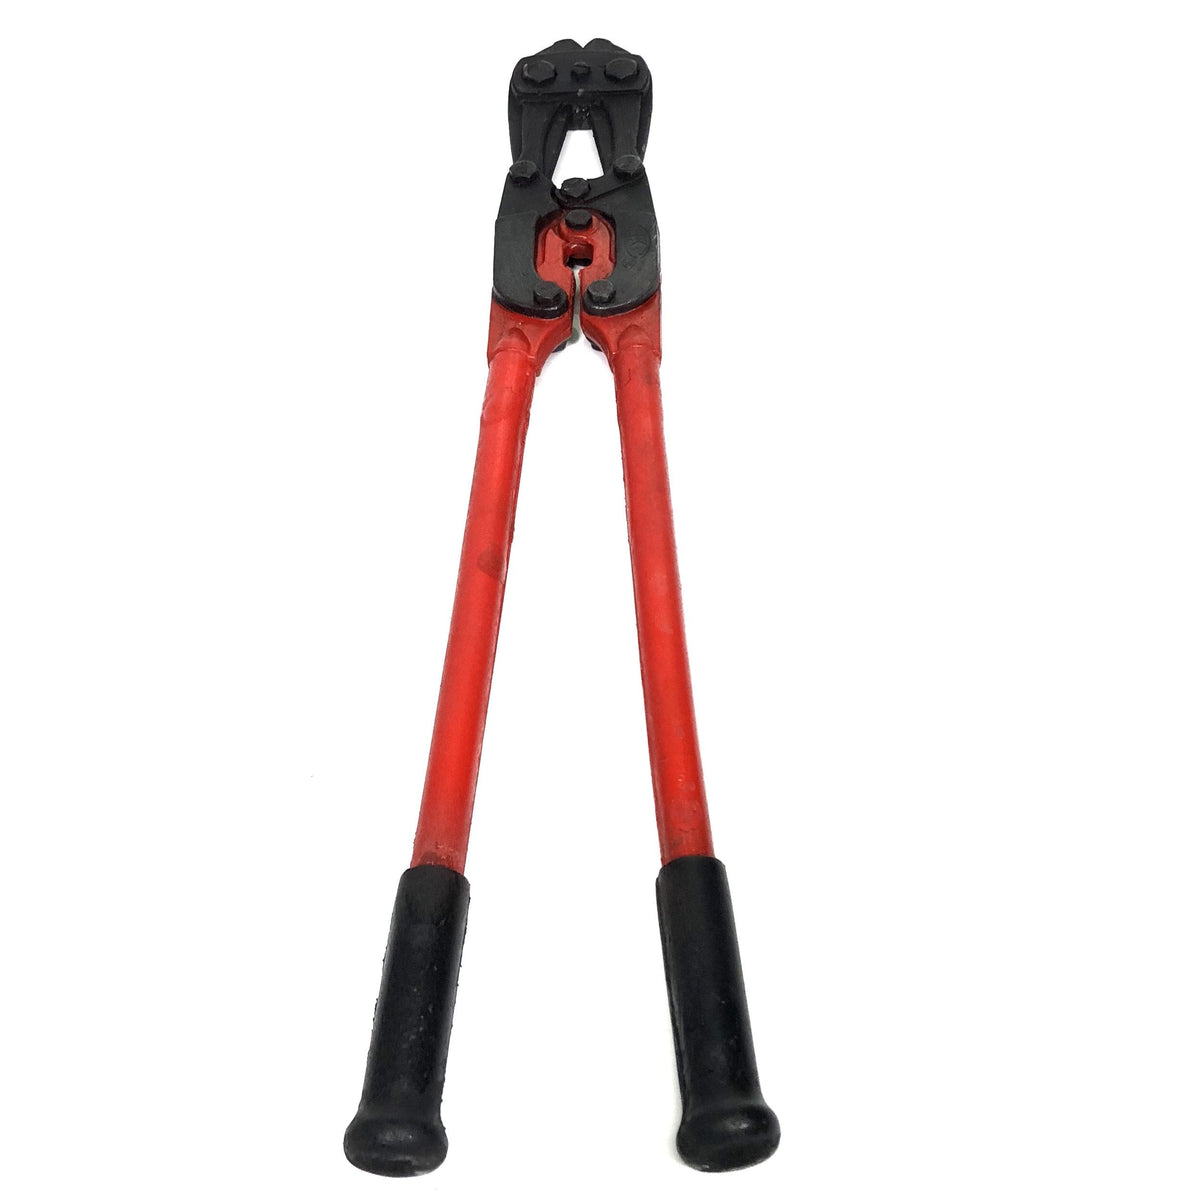 24 Inch Double Compound Bolt Cutters Foam Rubber Flexible Action Prop - BLACK / RED - New Black and Red